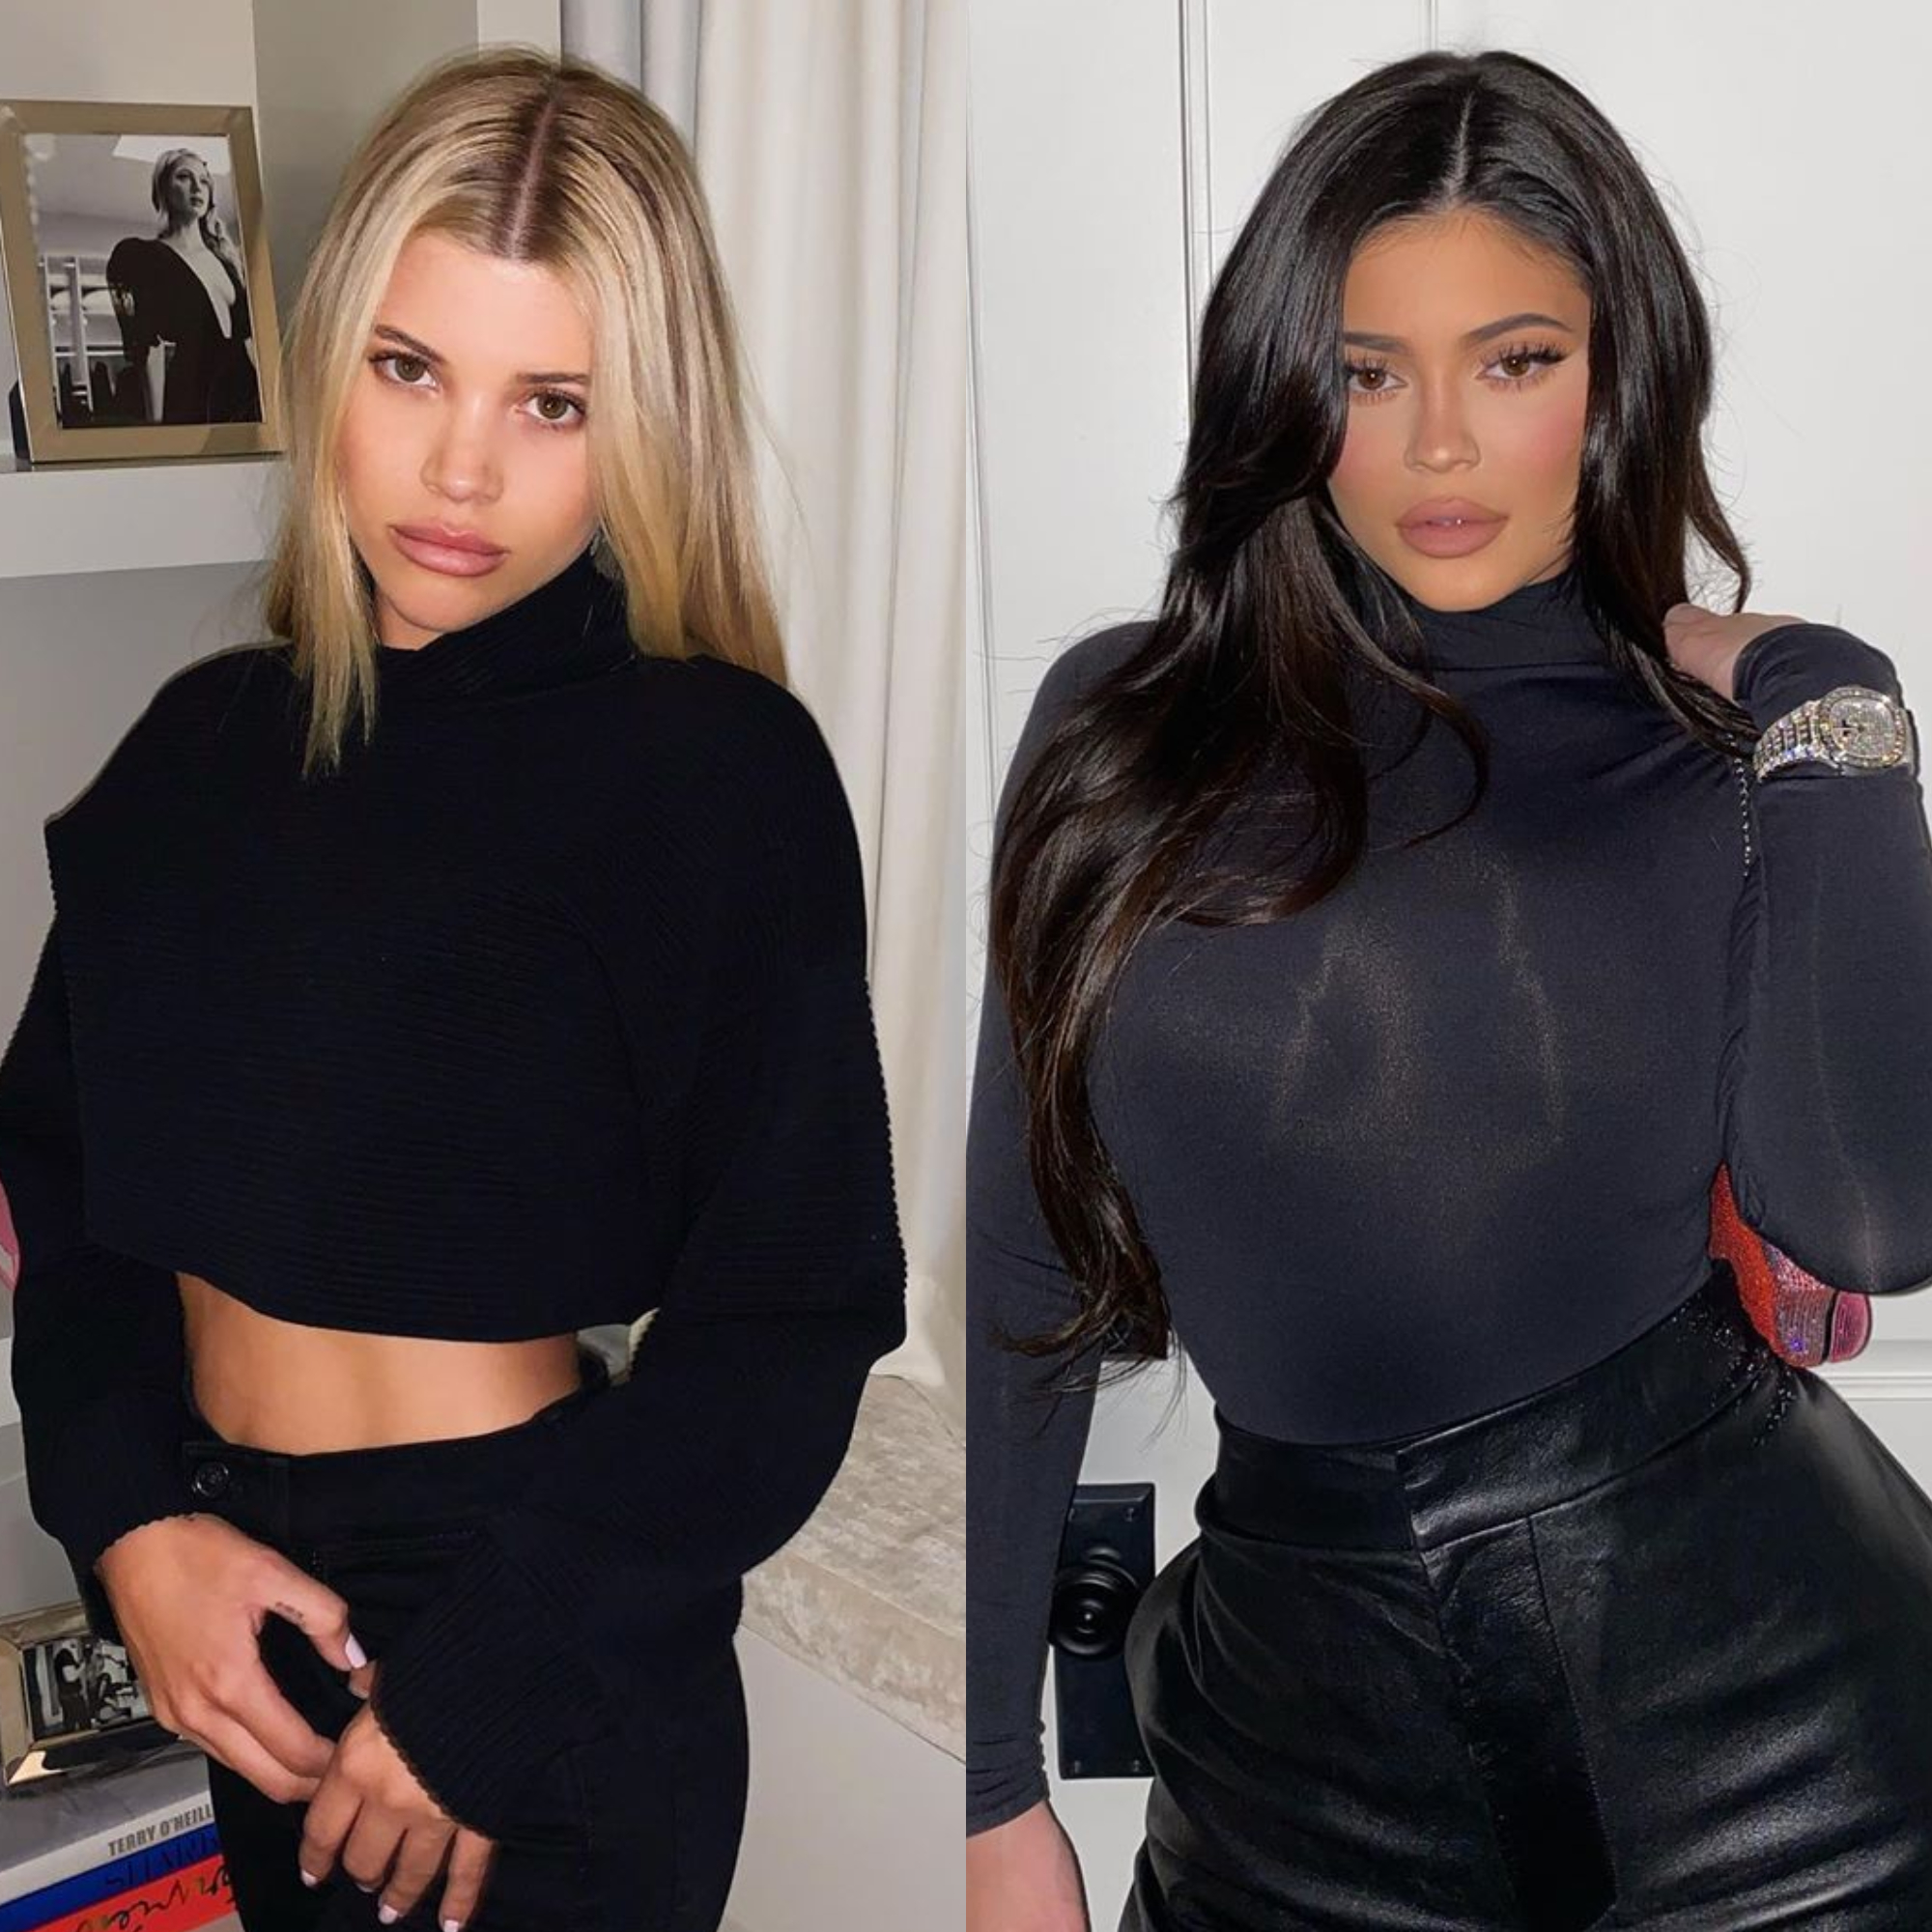 People Accuse Kylie Jenner Of Stealing Sofia Richie's Look